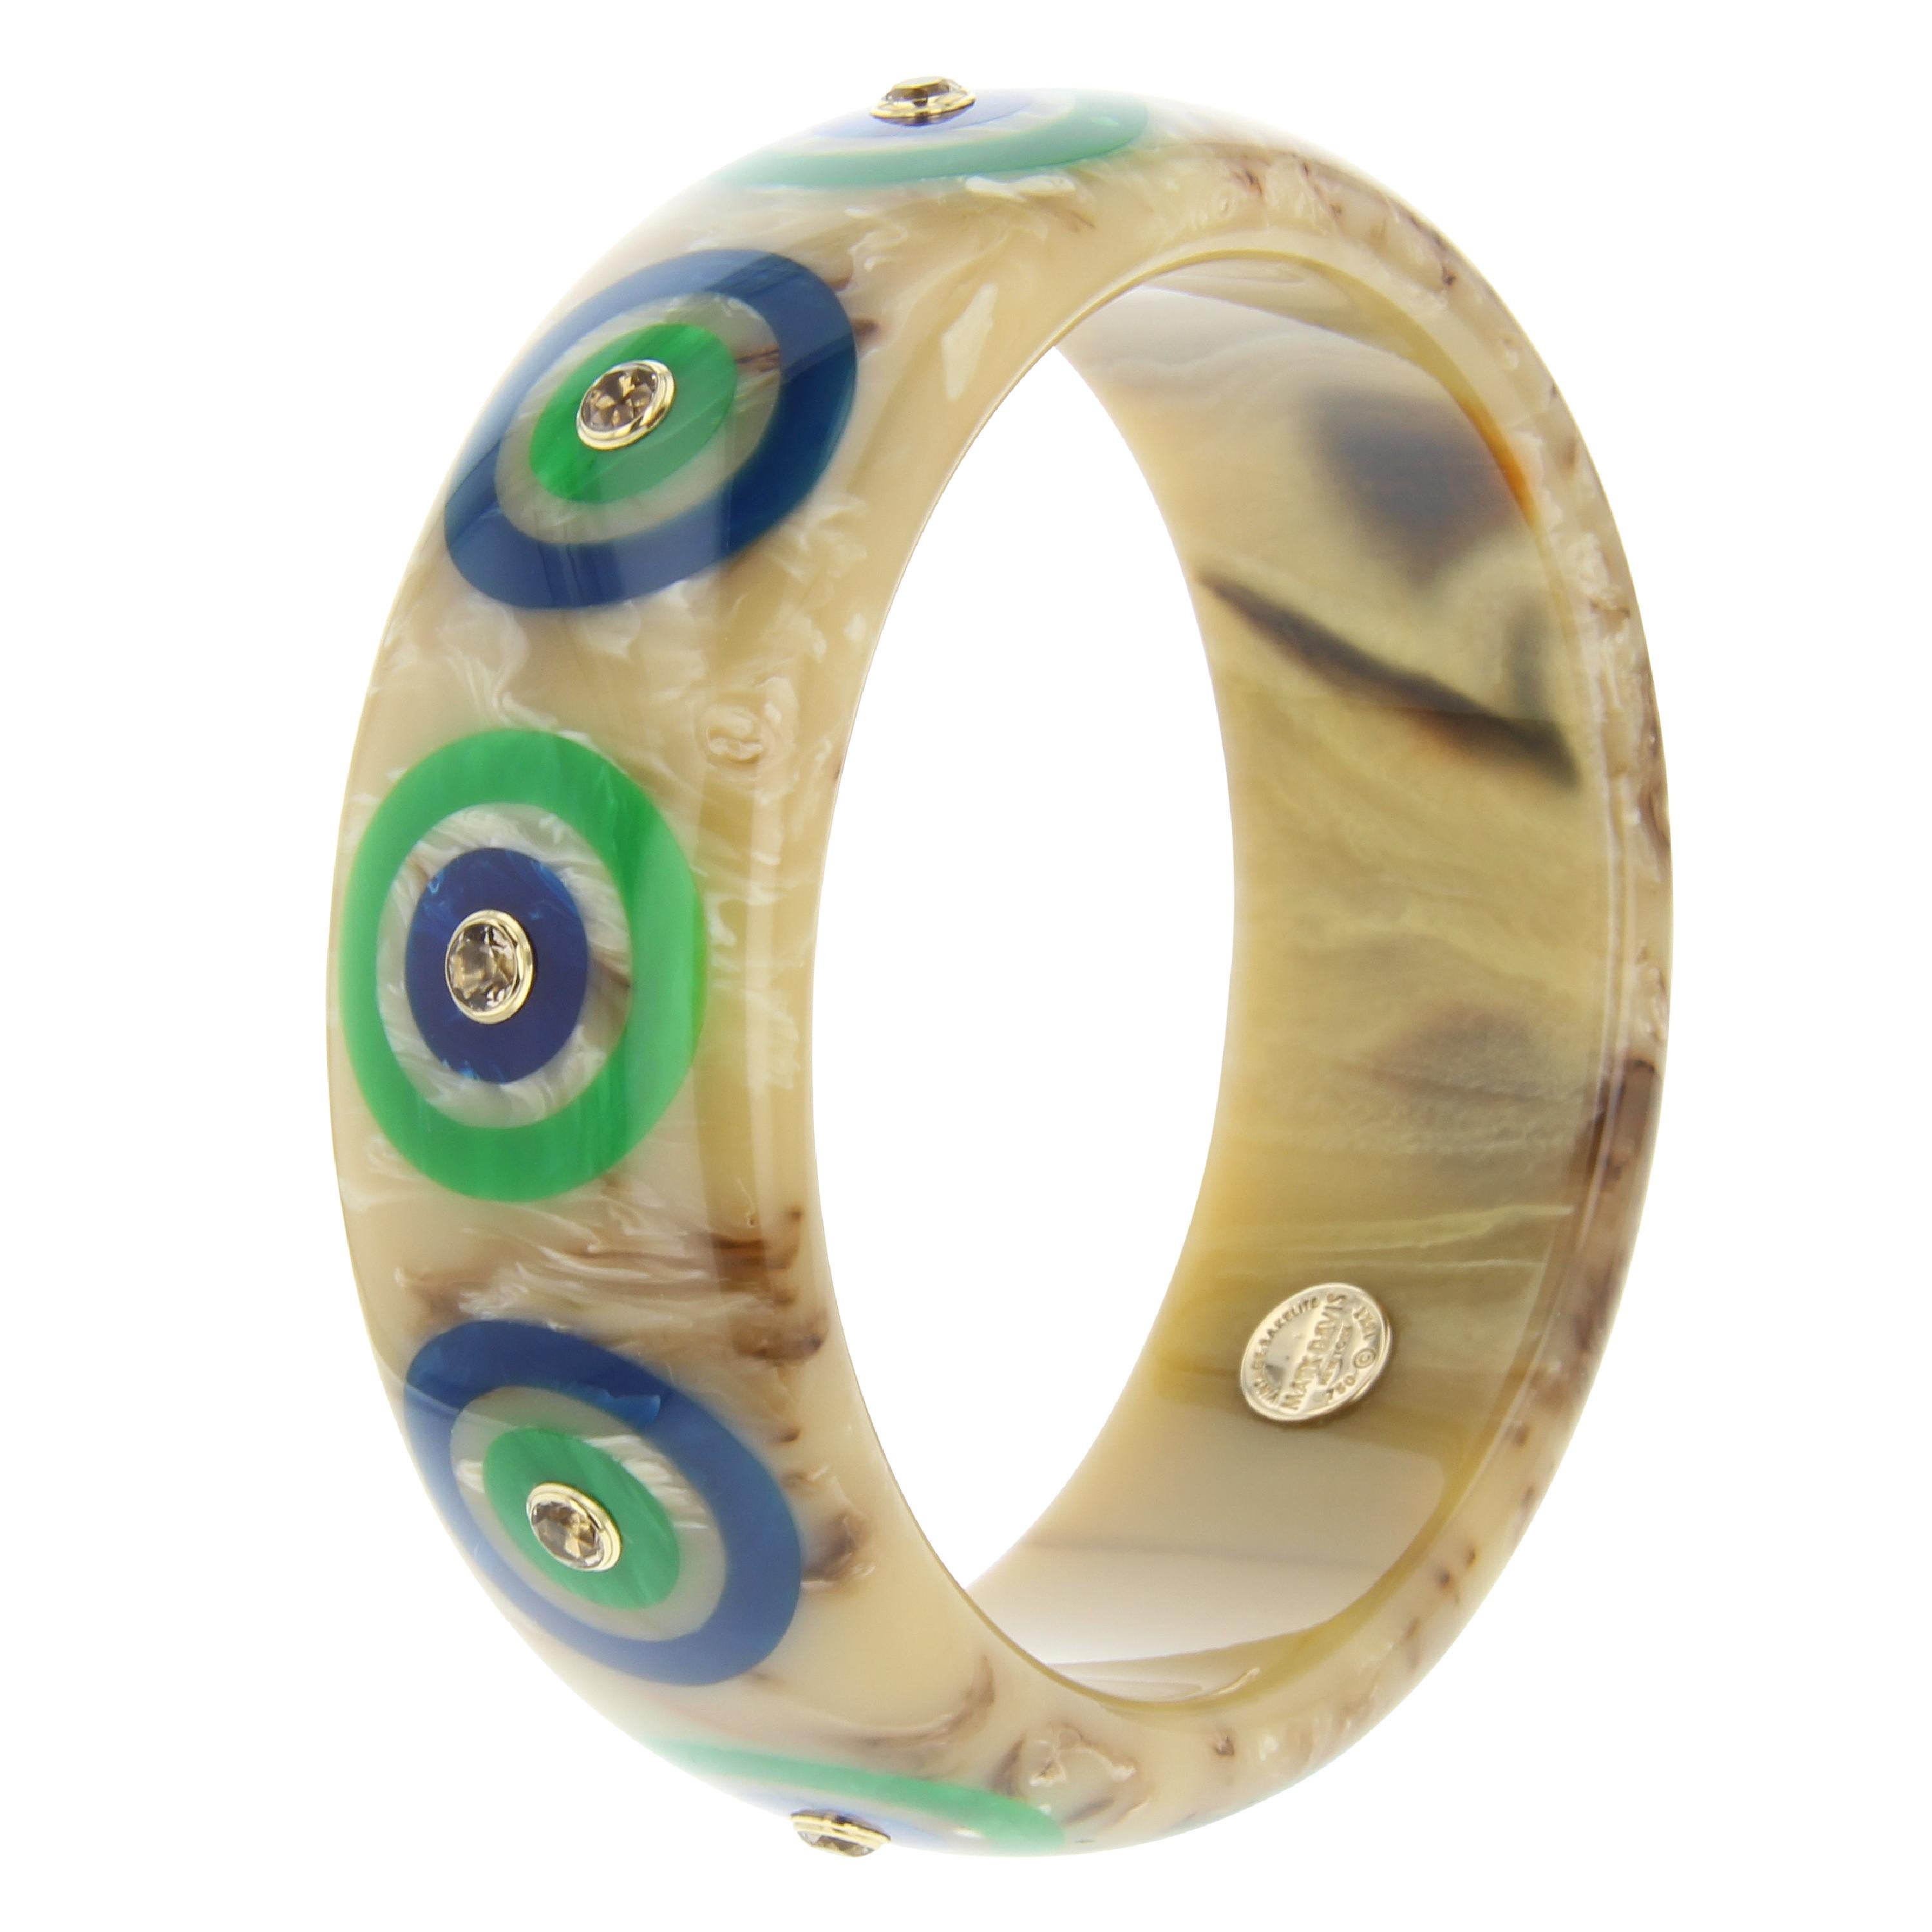 This striking Mark Davis bangle is narrow but still a substantial piece. Beautiful beige bakelite with a very subtle greenish tint has been inlaid with a bullseye pattern of green and blue bakelite. The center of each bullseye is set with smoky